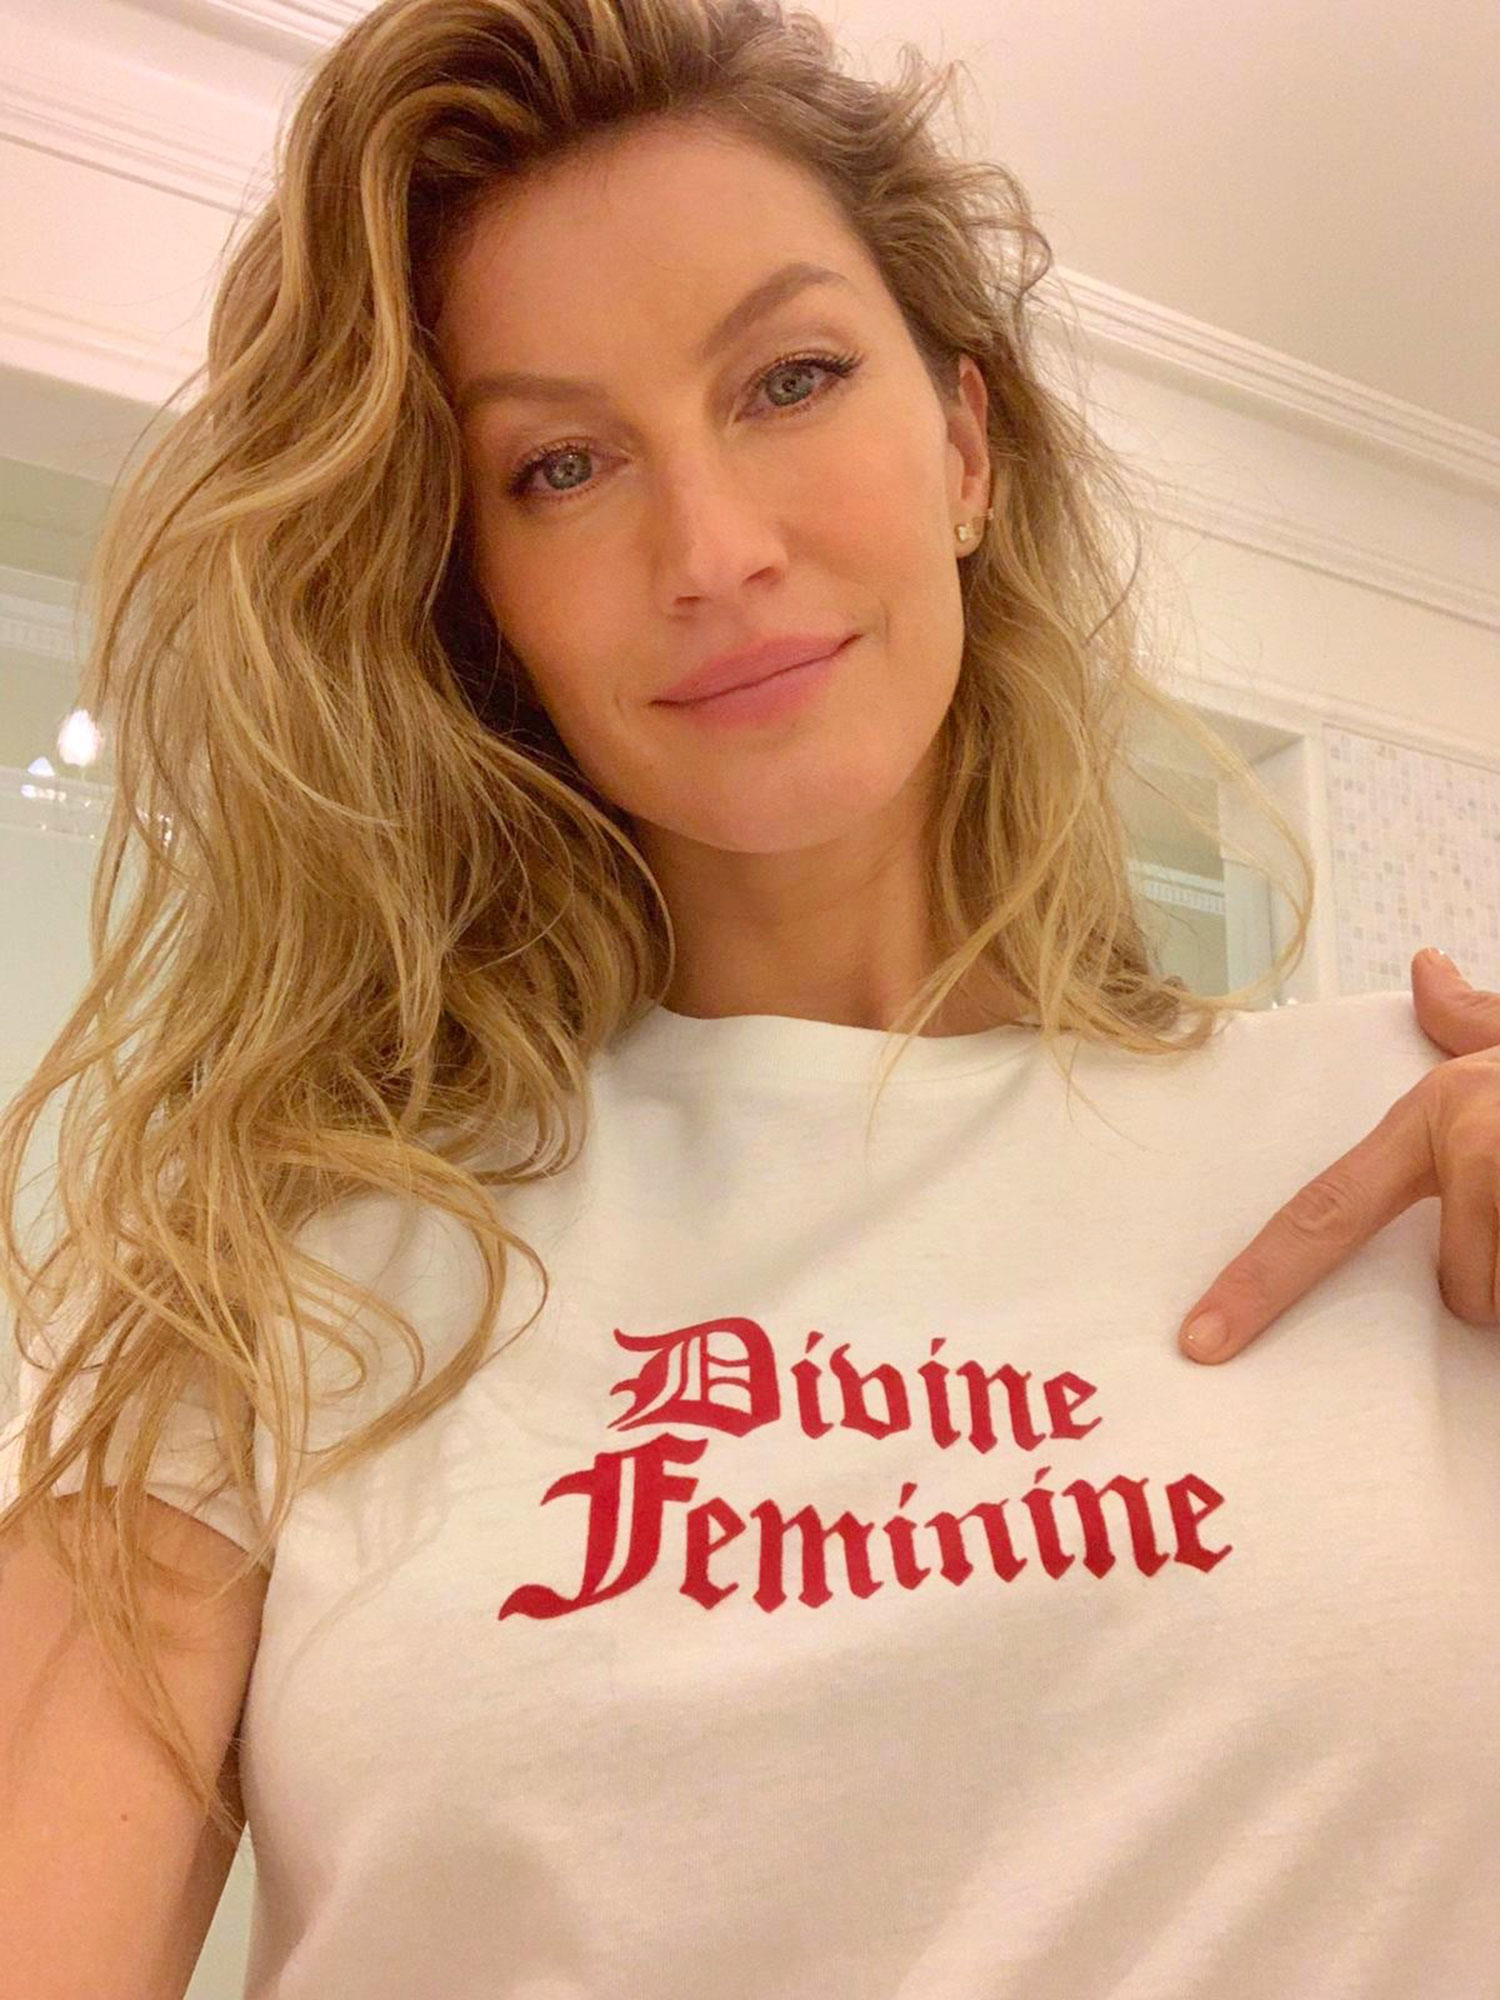 Net-a-Porter Is Here With a Star-Studded T-Shirt Collection for International Women's Day